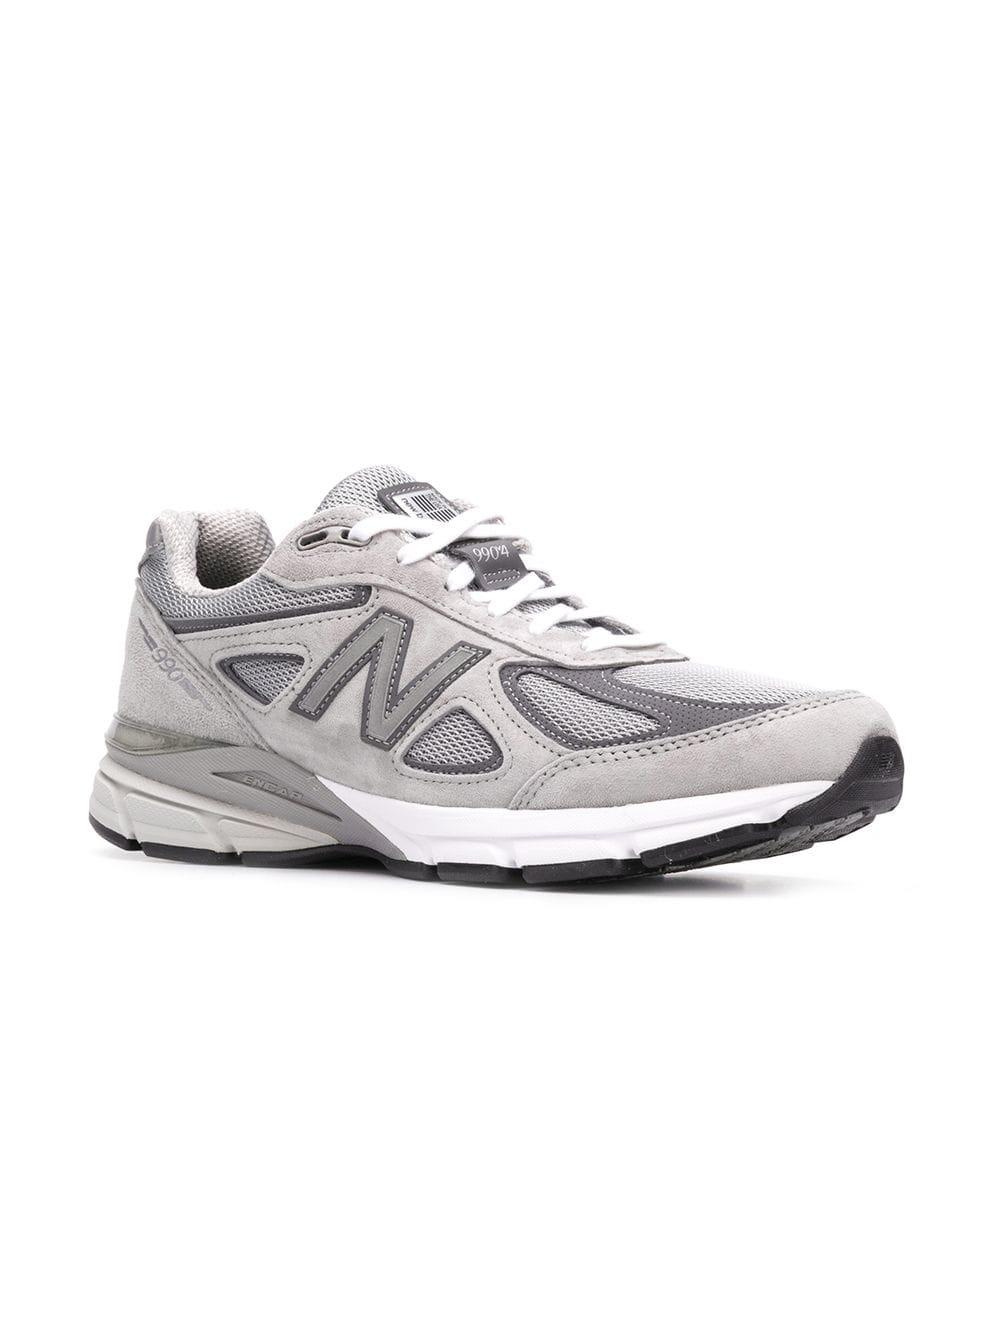 New Balance Suede 990v4 Lace-up Sneakers in Grey (Gray) for Men - Lyst